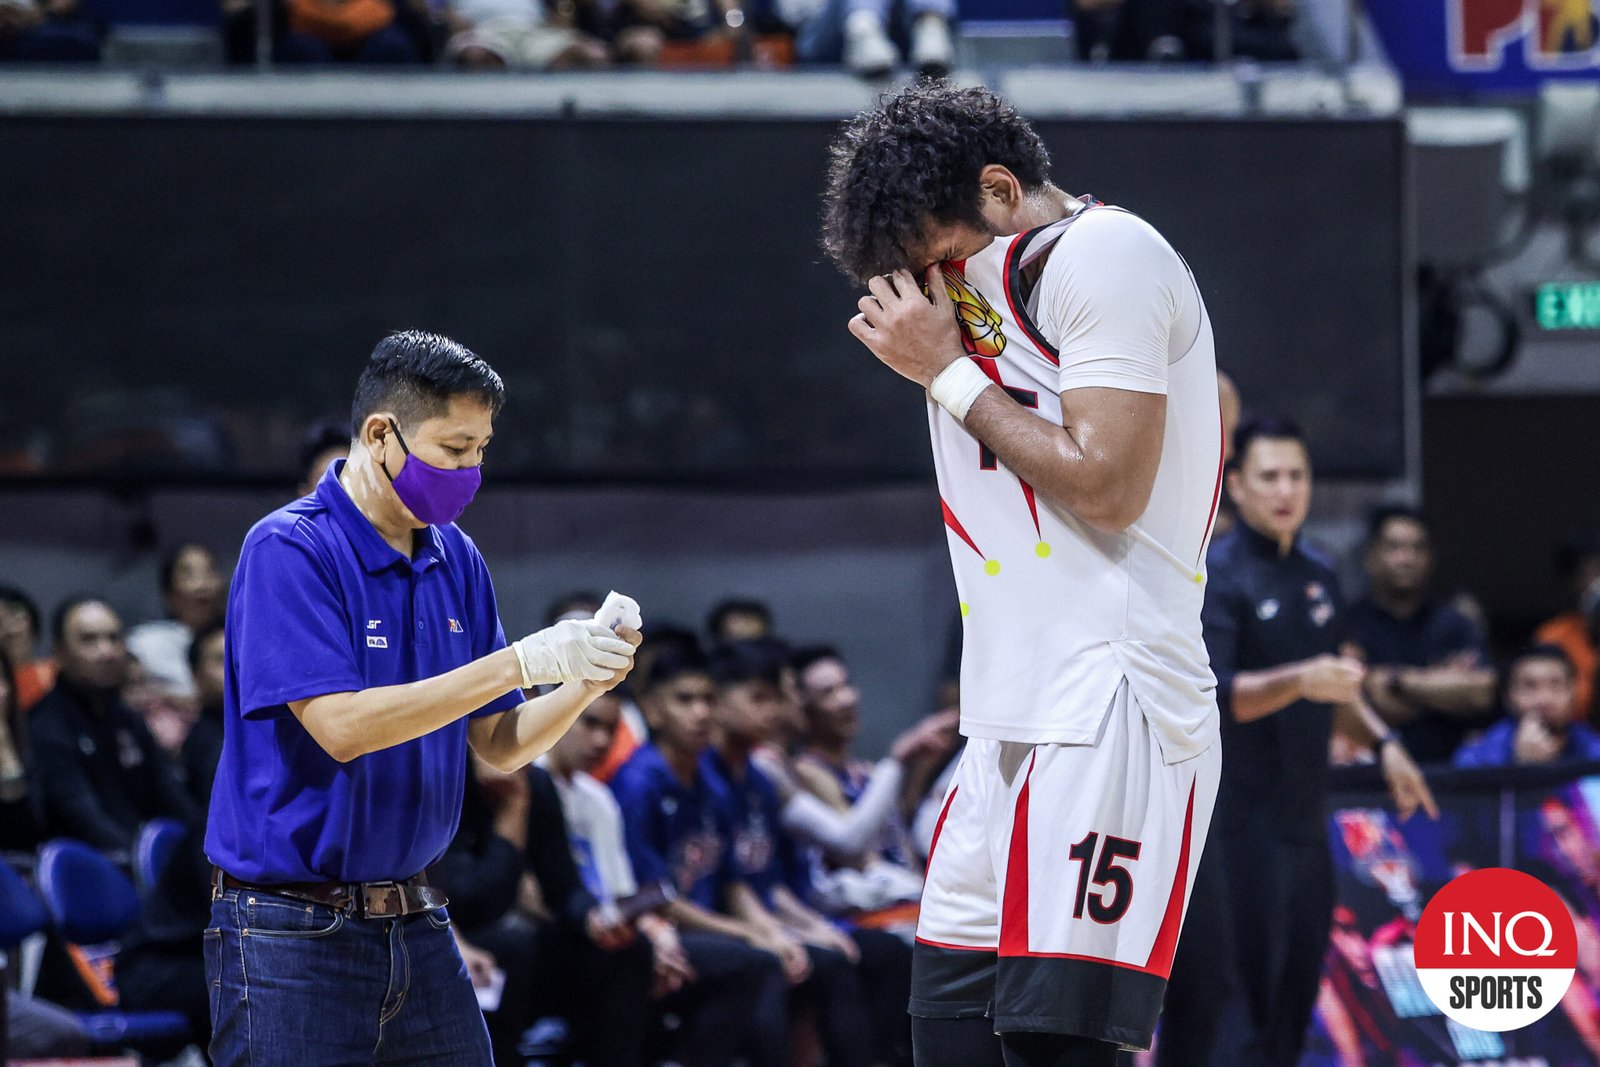 It’s Meralco’s time to win PBA title